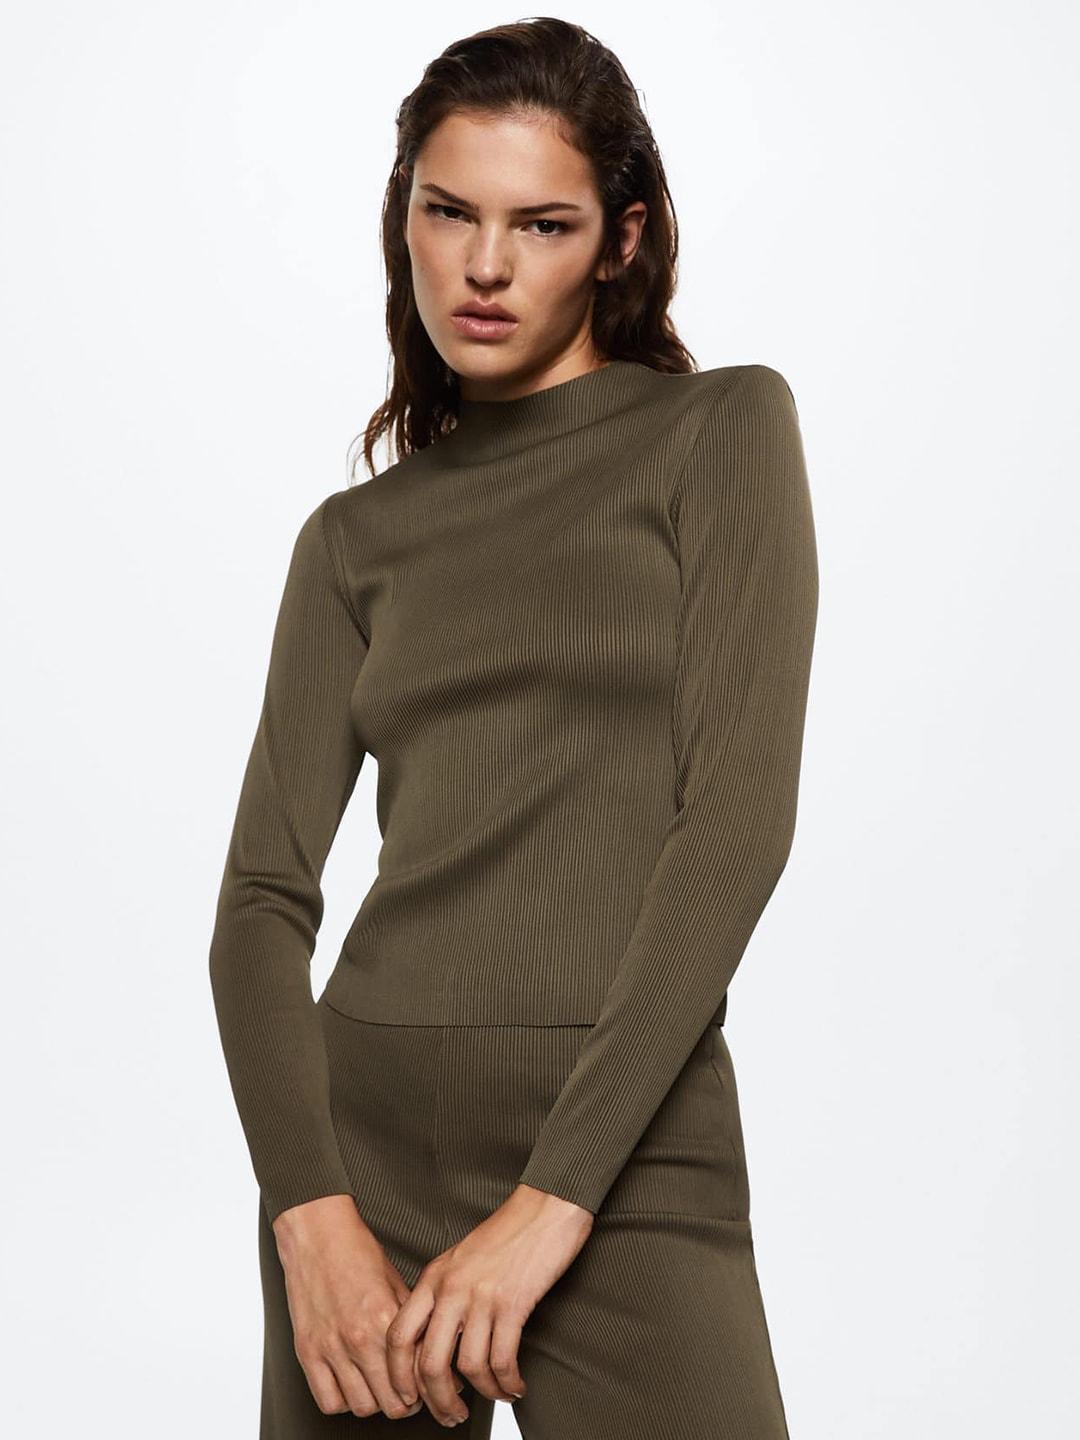 mango olive green ribbed sustainable top